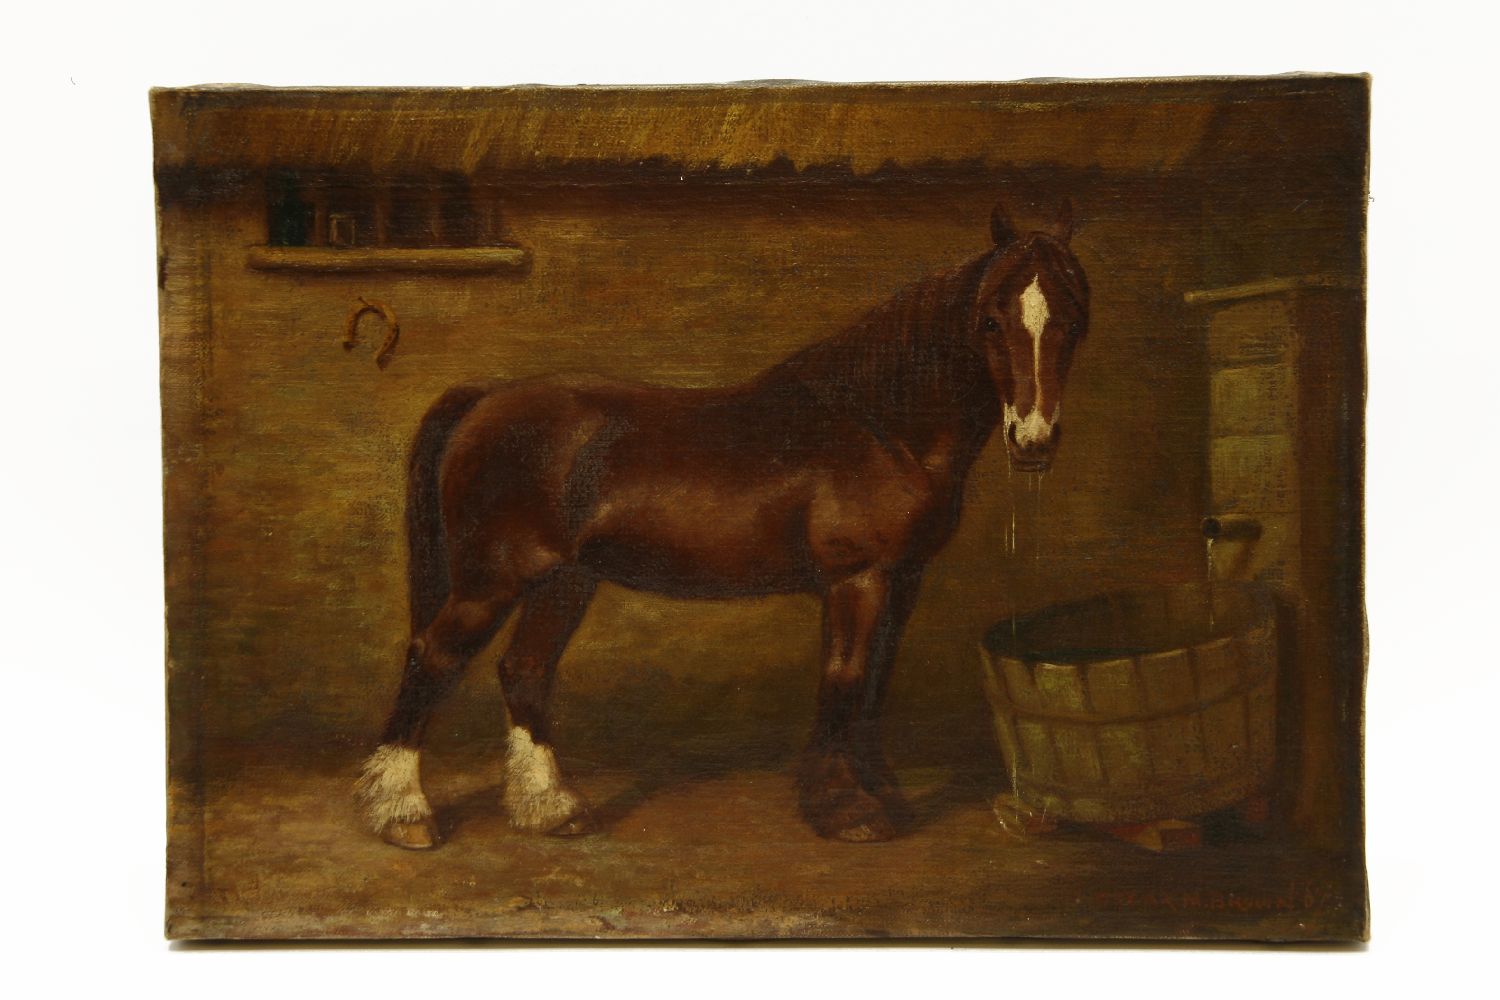 Mr Brown, 19th century English School,OSCAR, A CHESTNUT HORSEoil on canvas, signed and inscribed l.